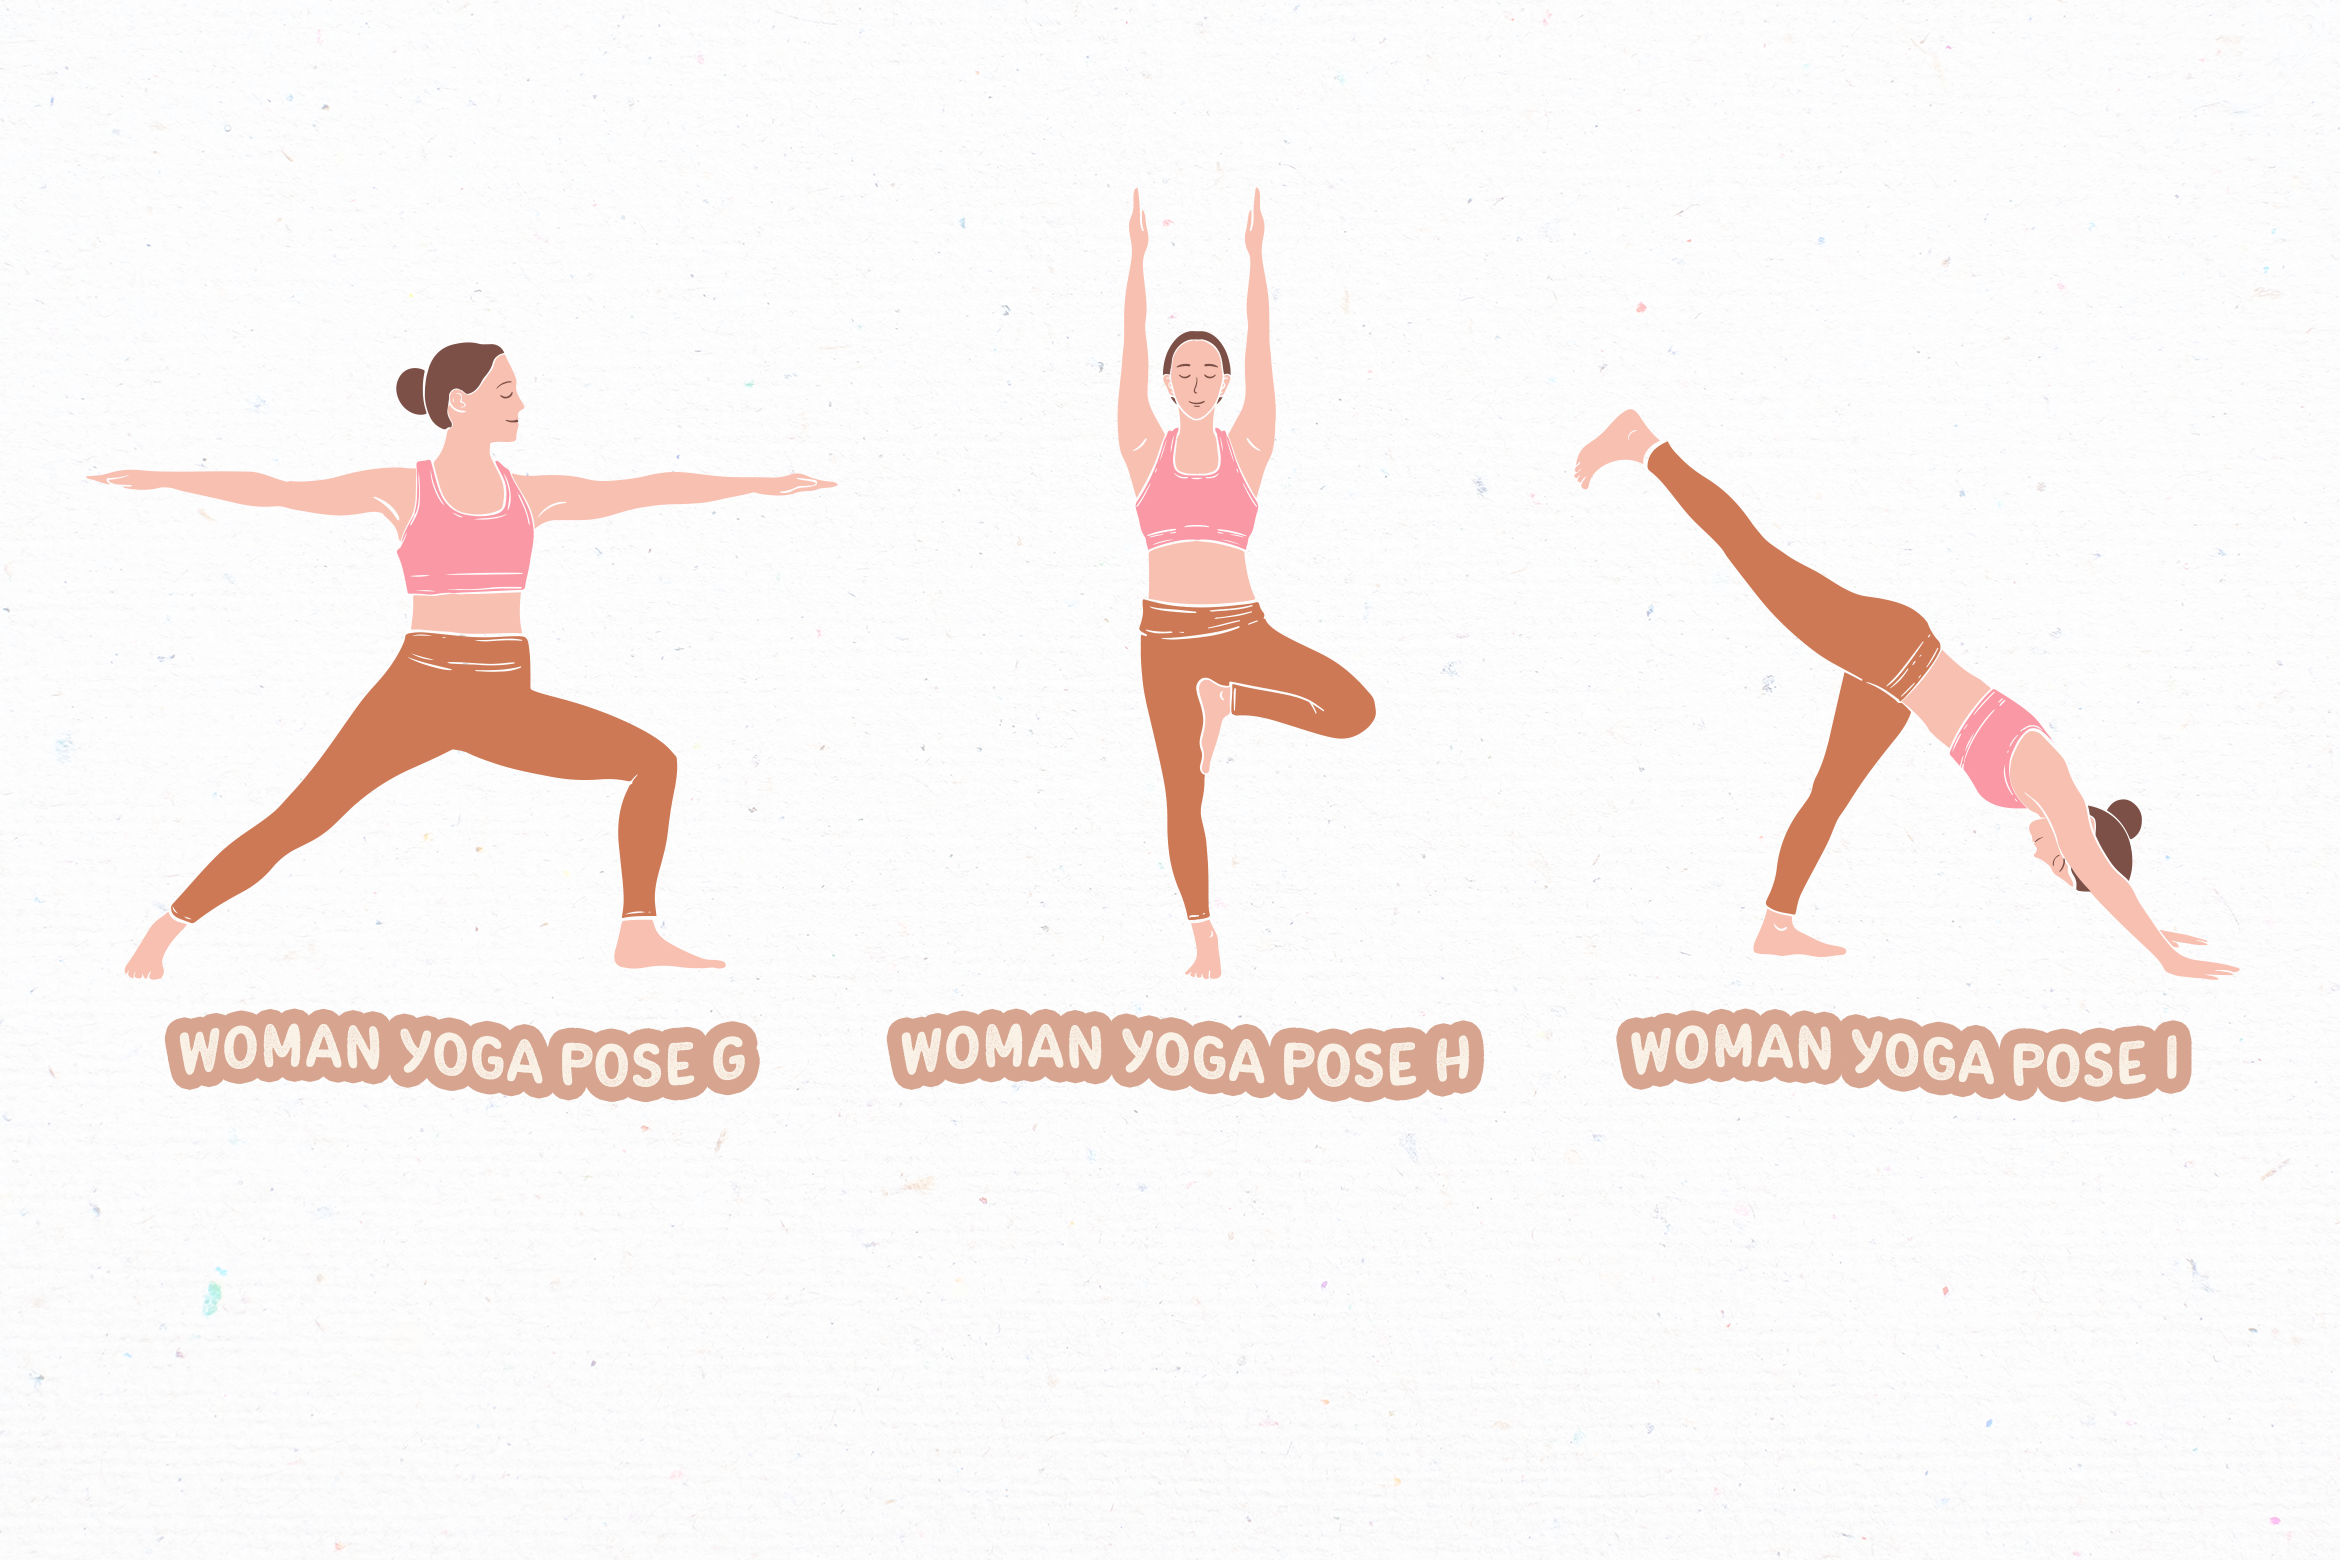 Yoga Stretch Vector Art PNG, 6 Yoga Poses To Stretch Body, Yoga, Yoga Day, Yoga  Vector PNG Image For Free Download | Yoga background, Yoga png, Poses